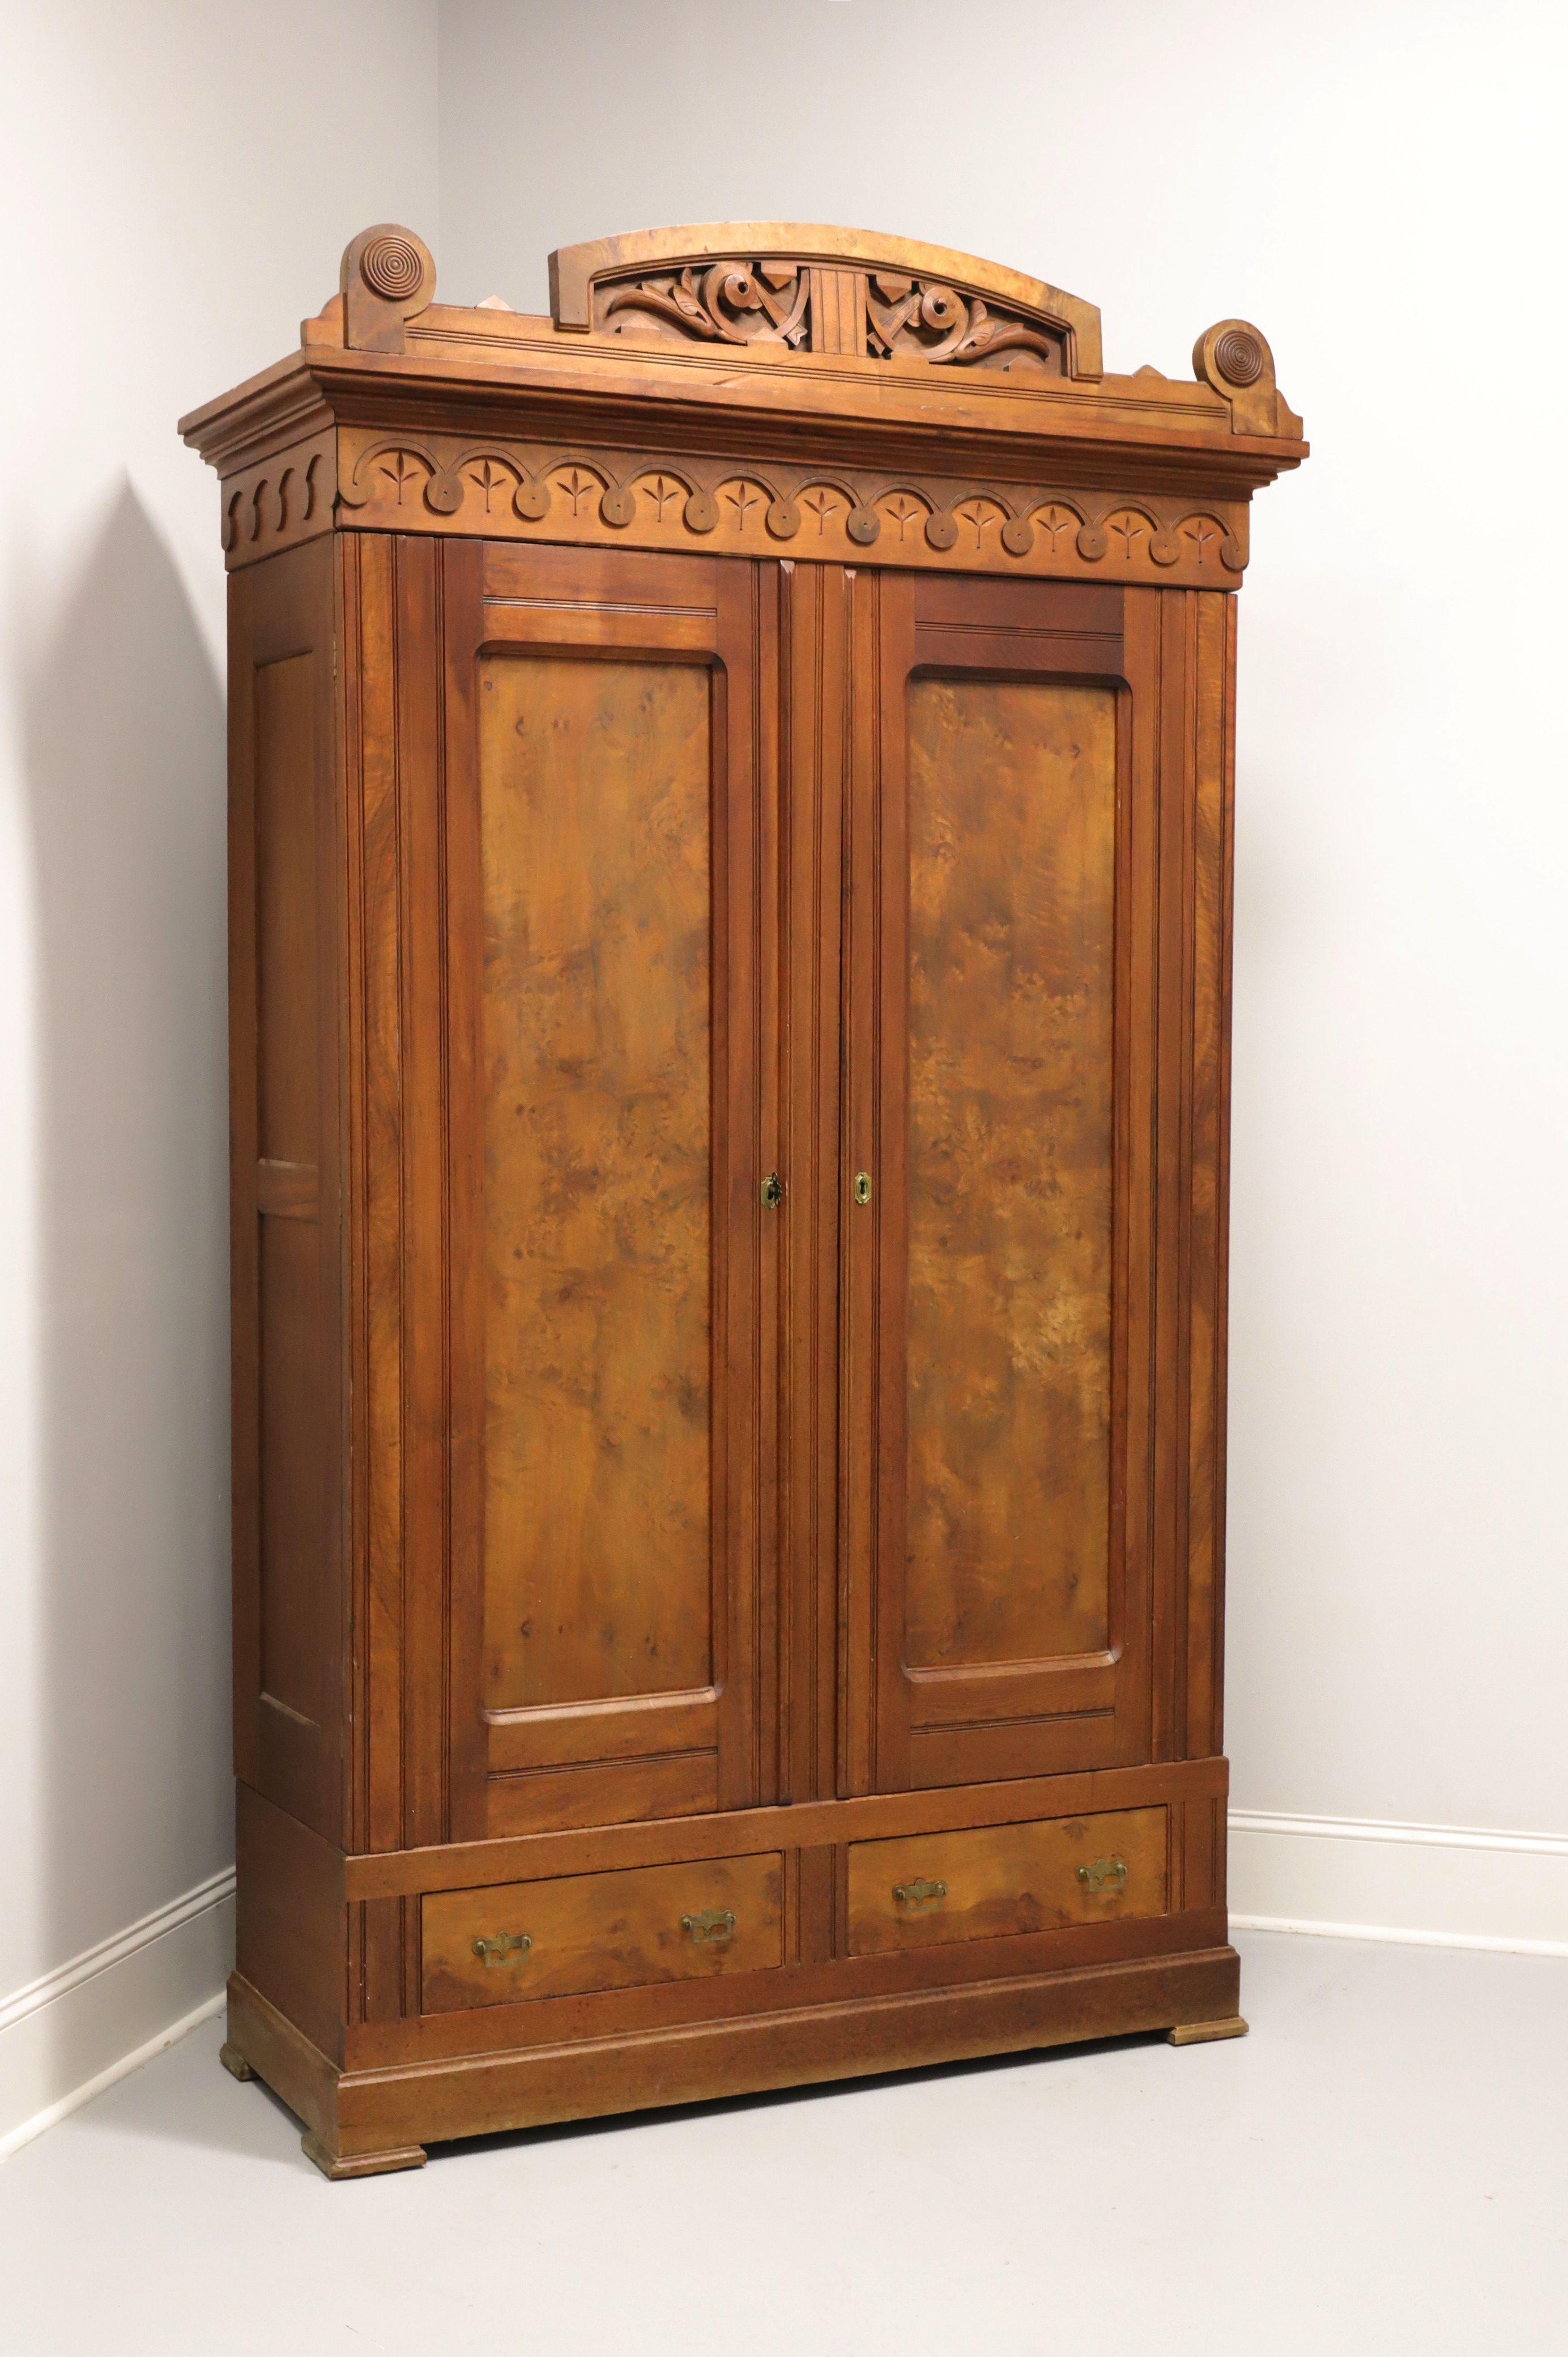 An antique Victorian Eastlake style armoire, unbranded, from the 19th Century. Made of walnut with burl walnut inlays, brass hardware, decorative carvings to entablature, crown moulding & ornate pediment to top, and solid base with block feet. Upper